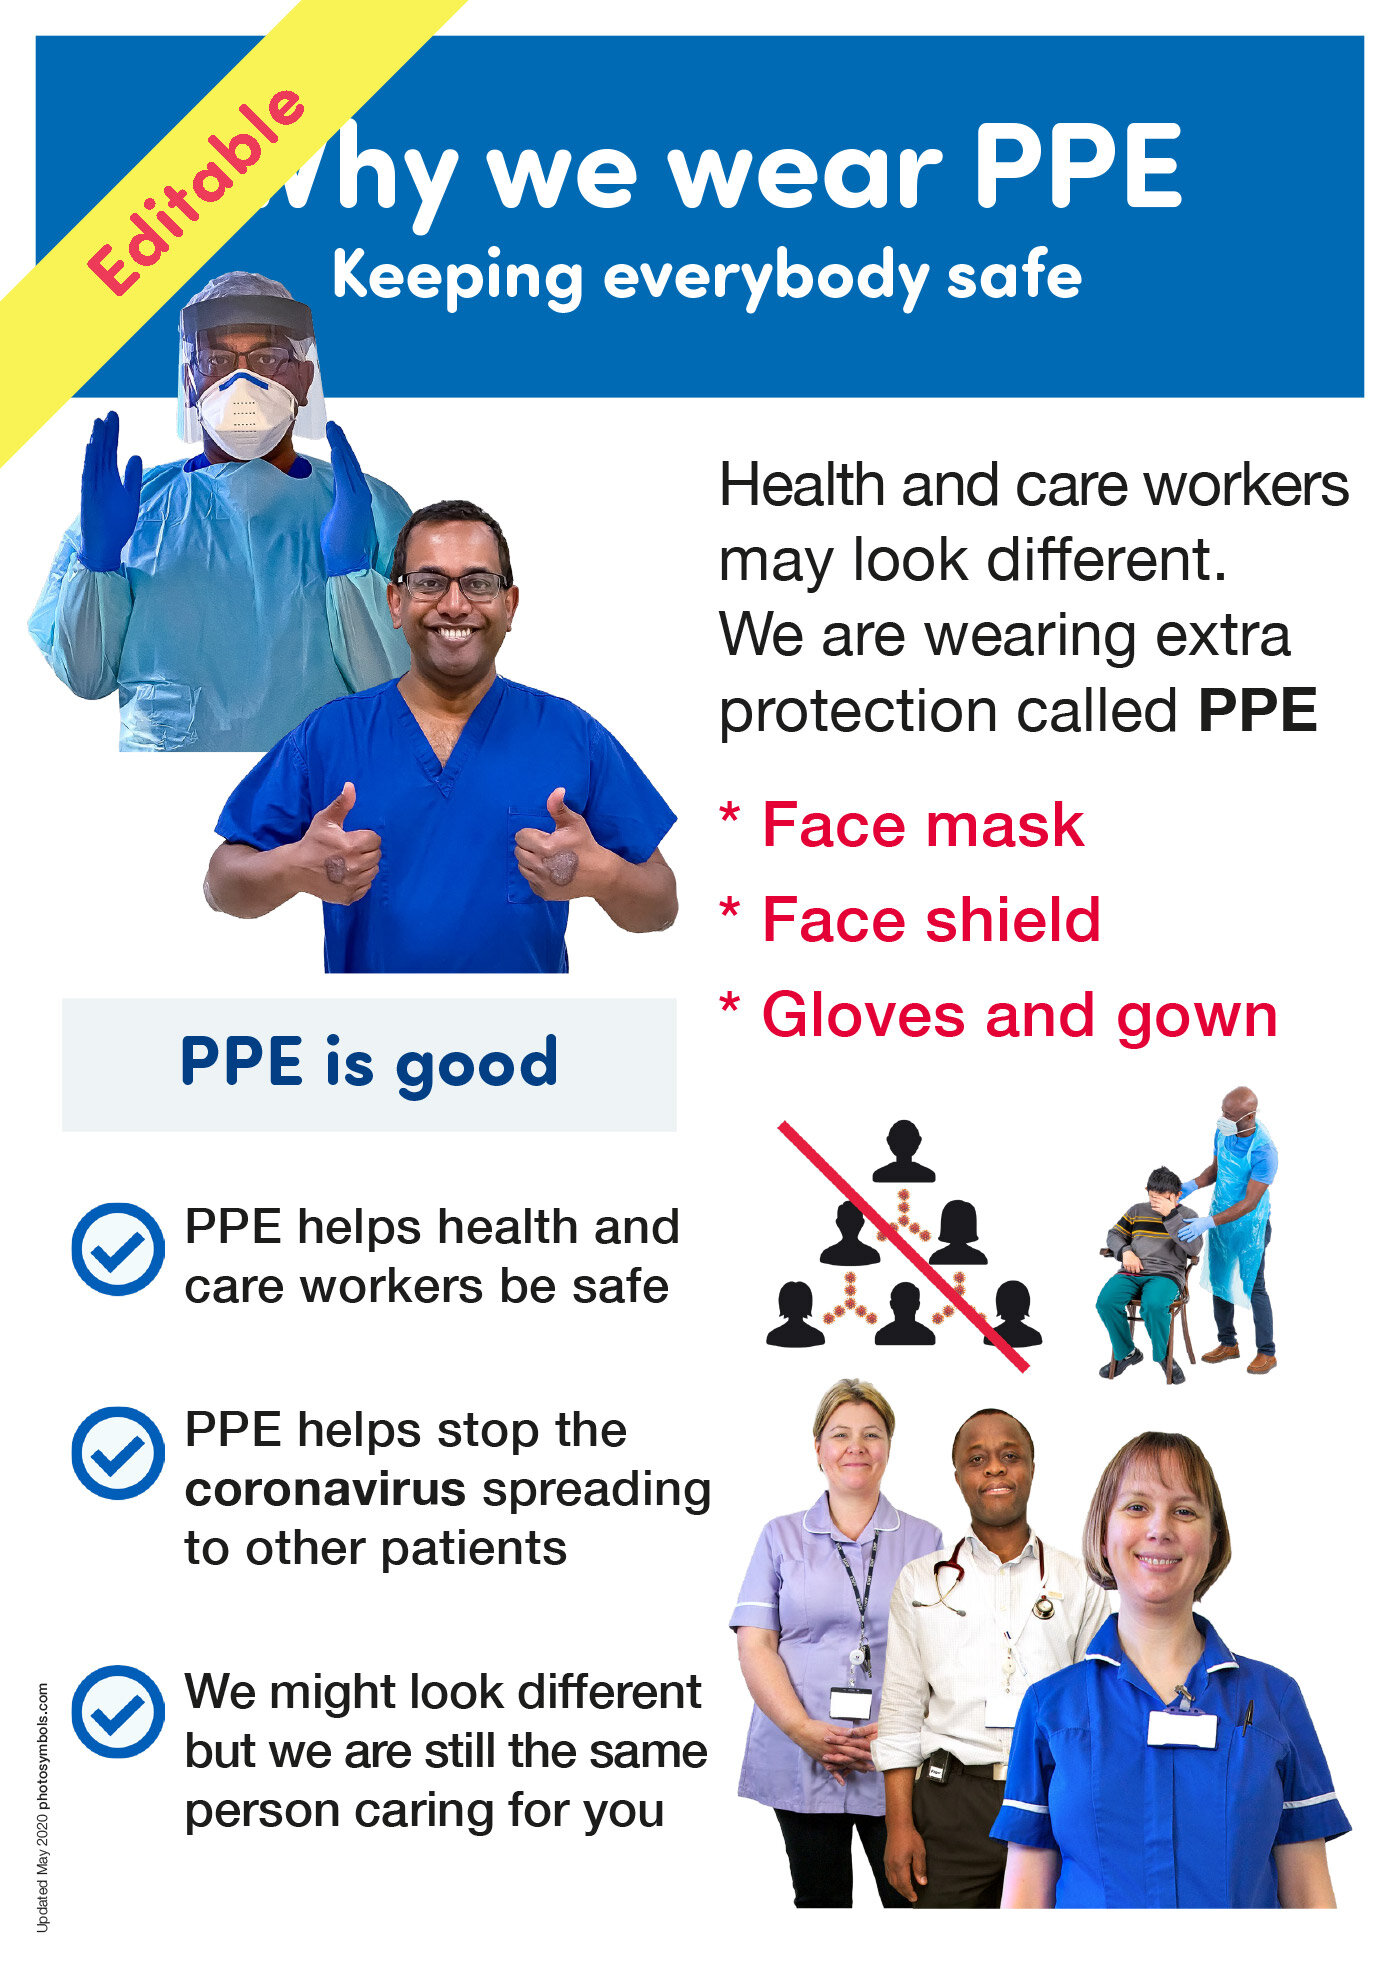 Why we wear PPE